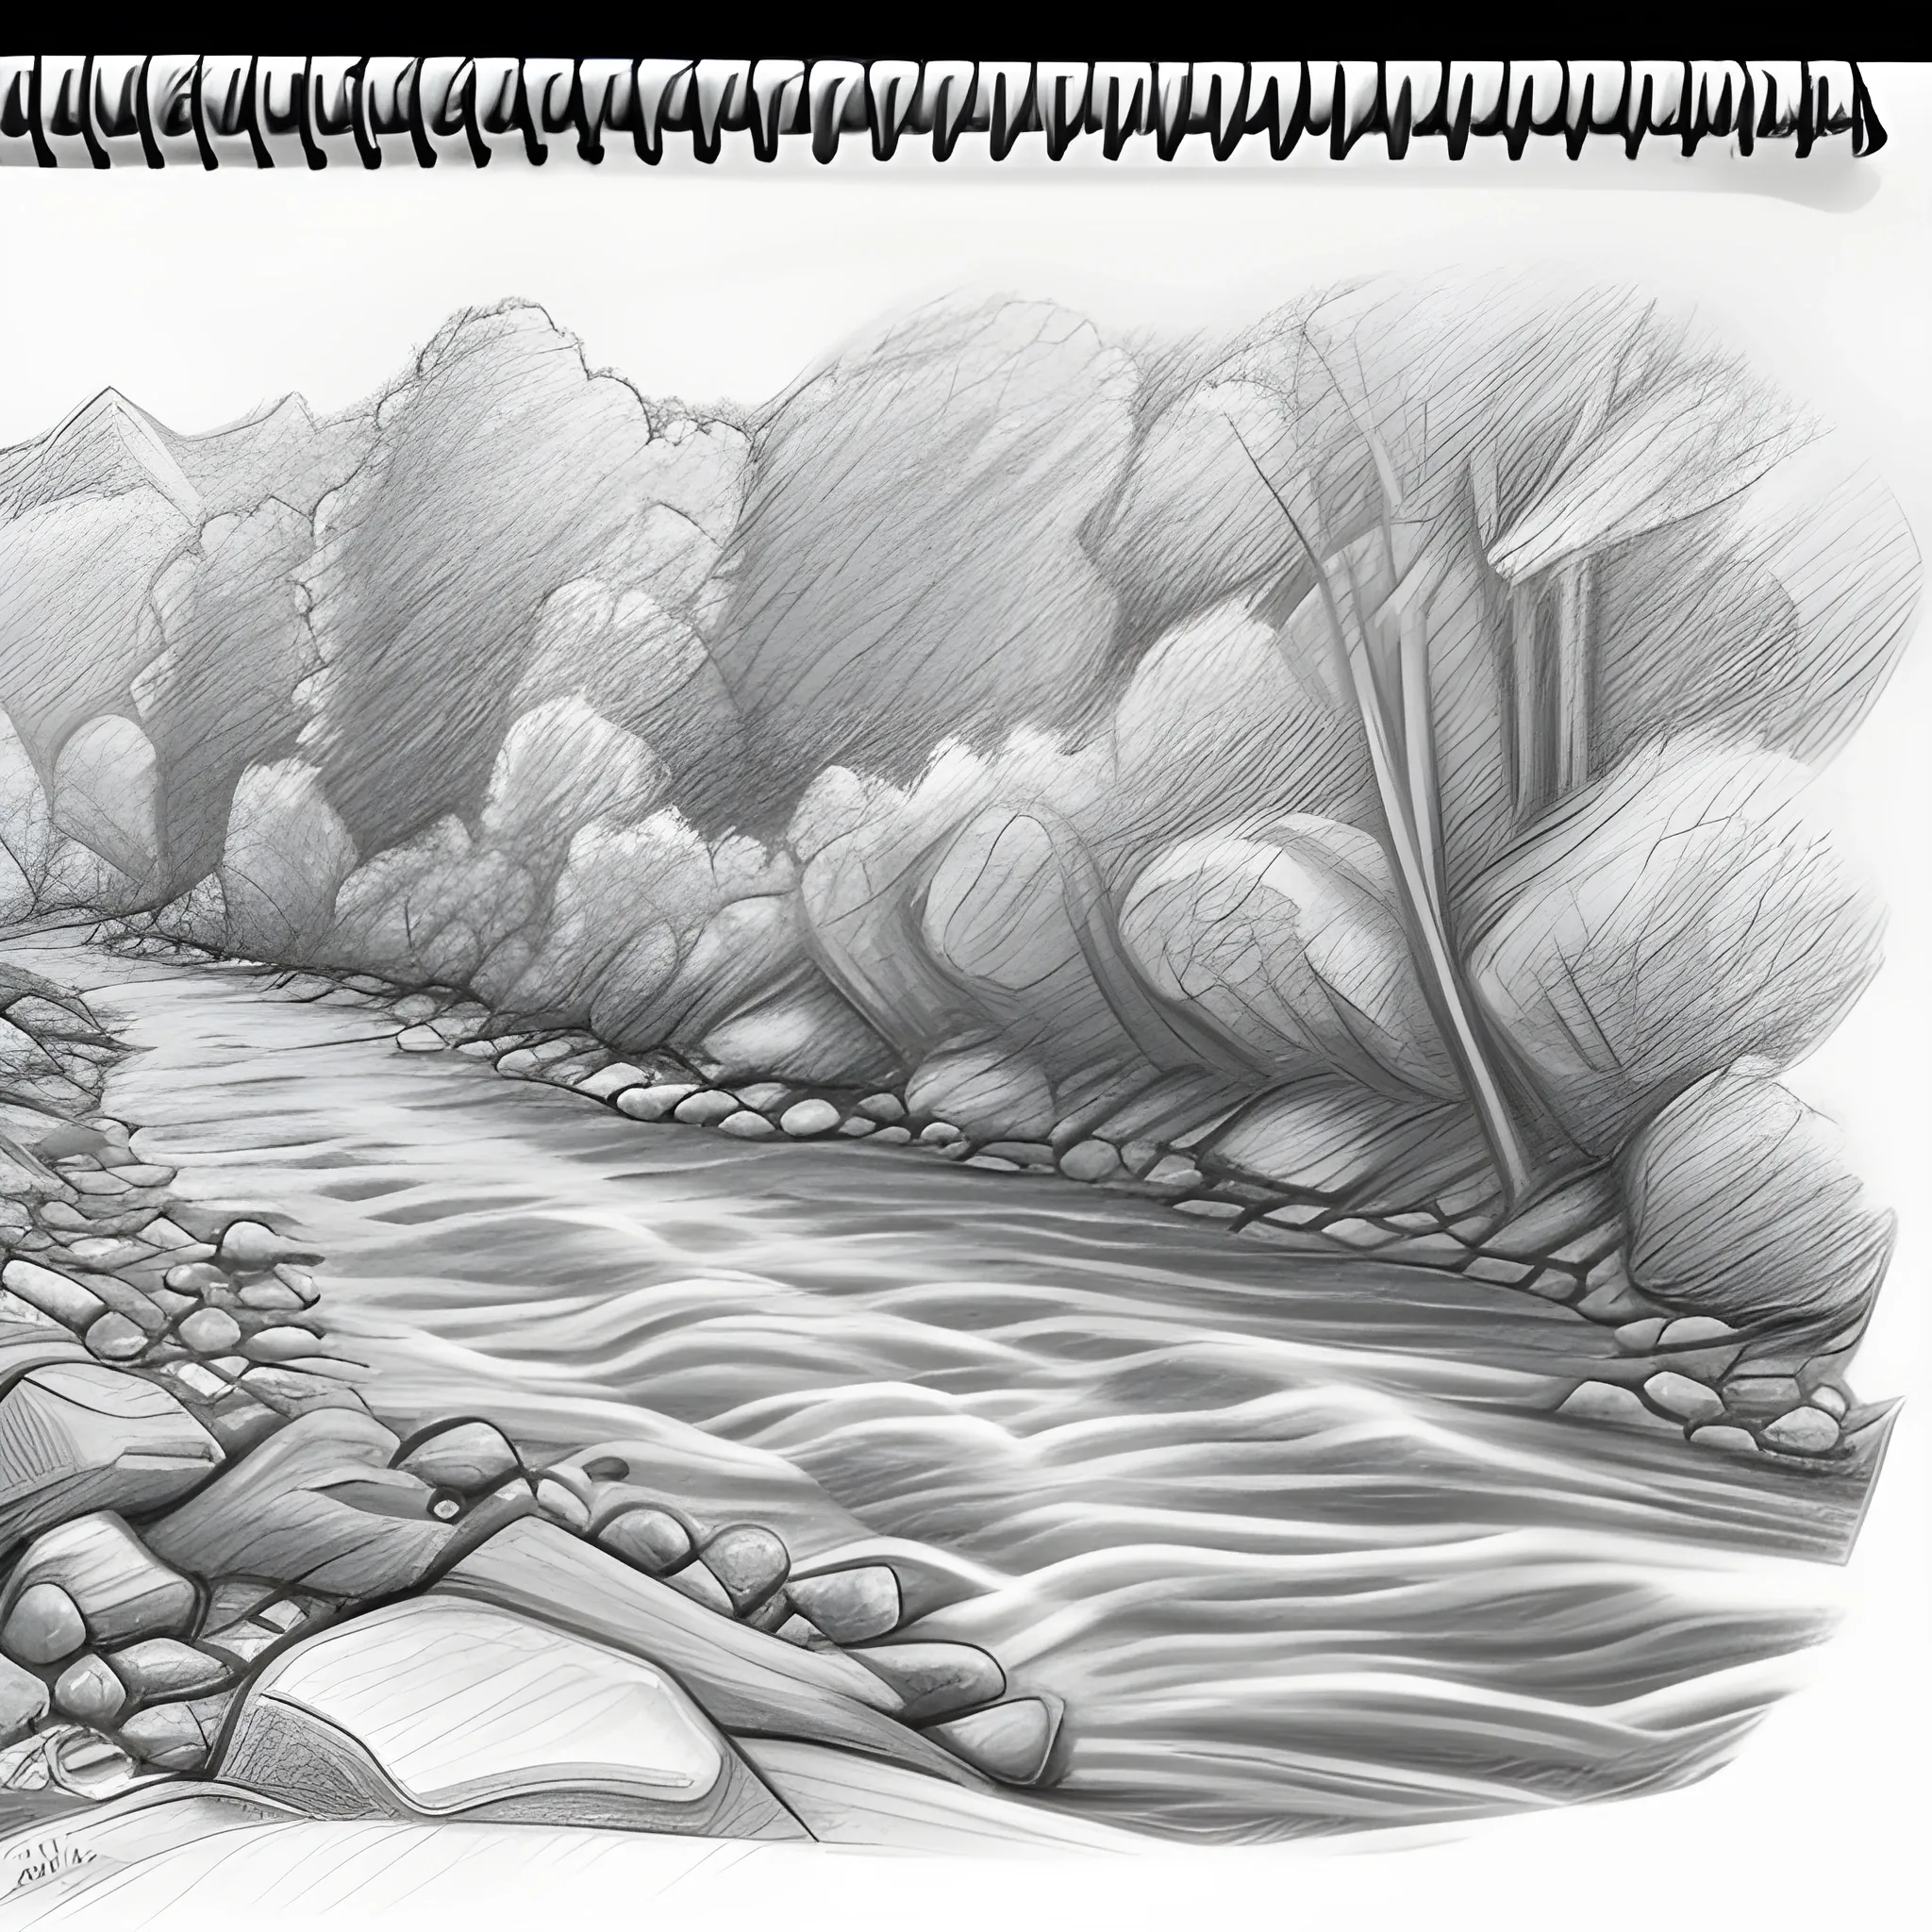 How To Draw A River Scenery Simple Step By Step |Drawing River Scenery Easy  - YouTube